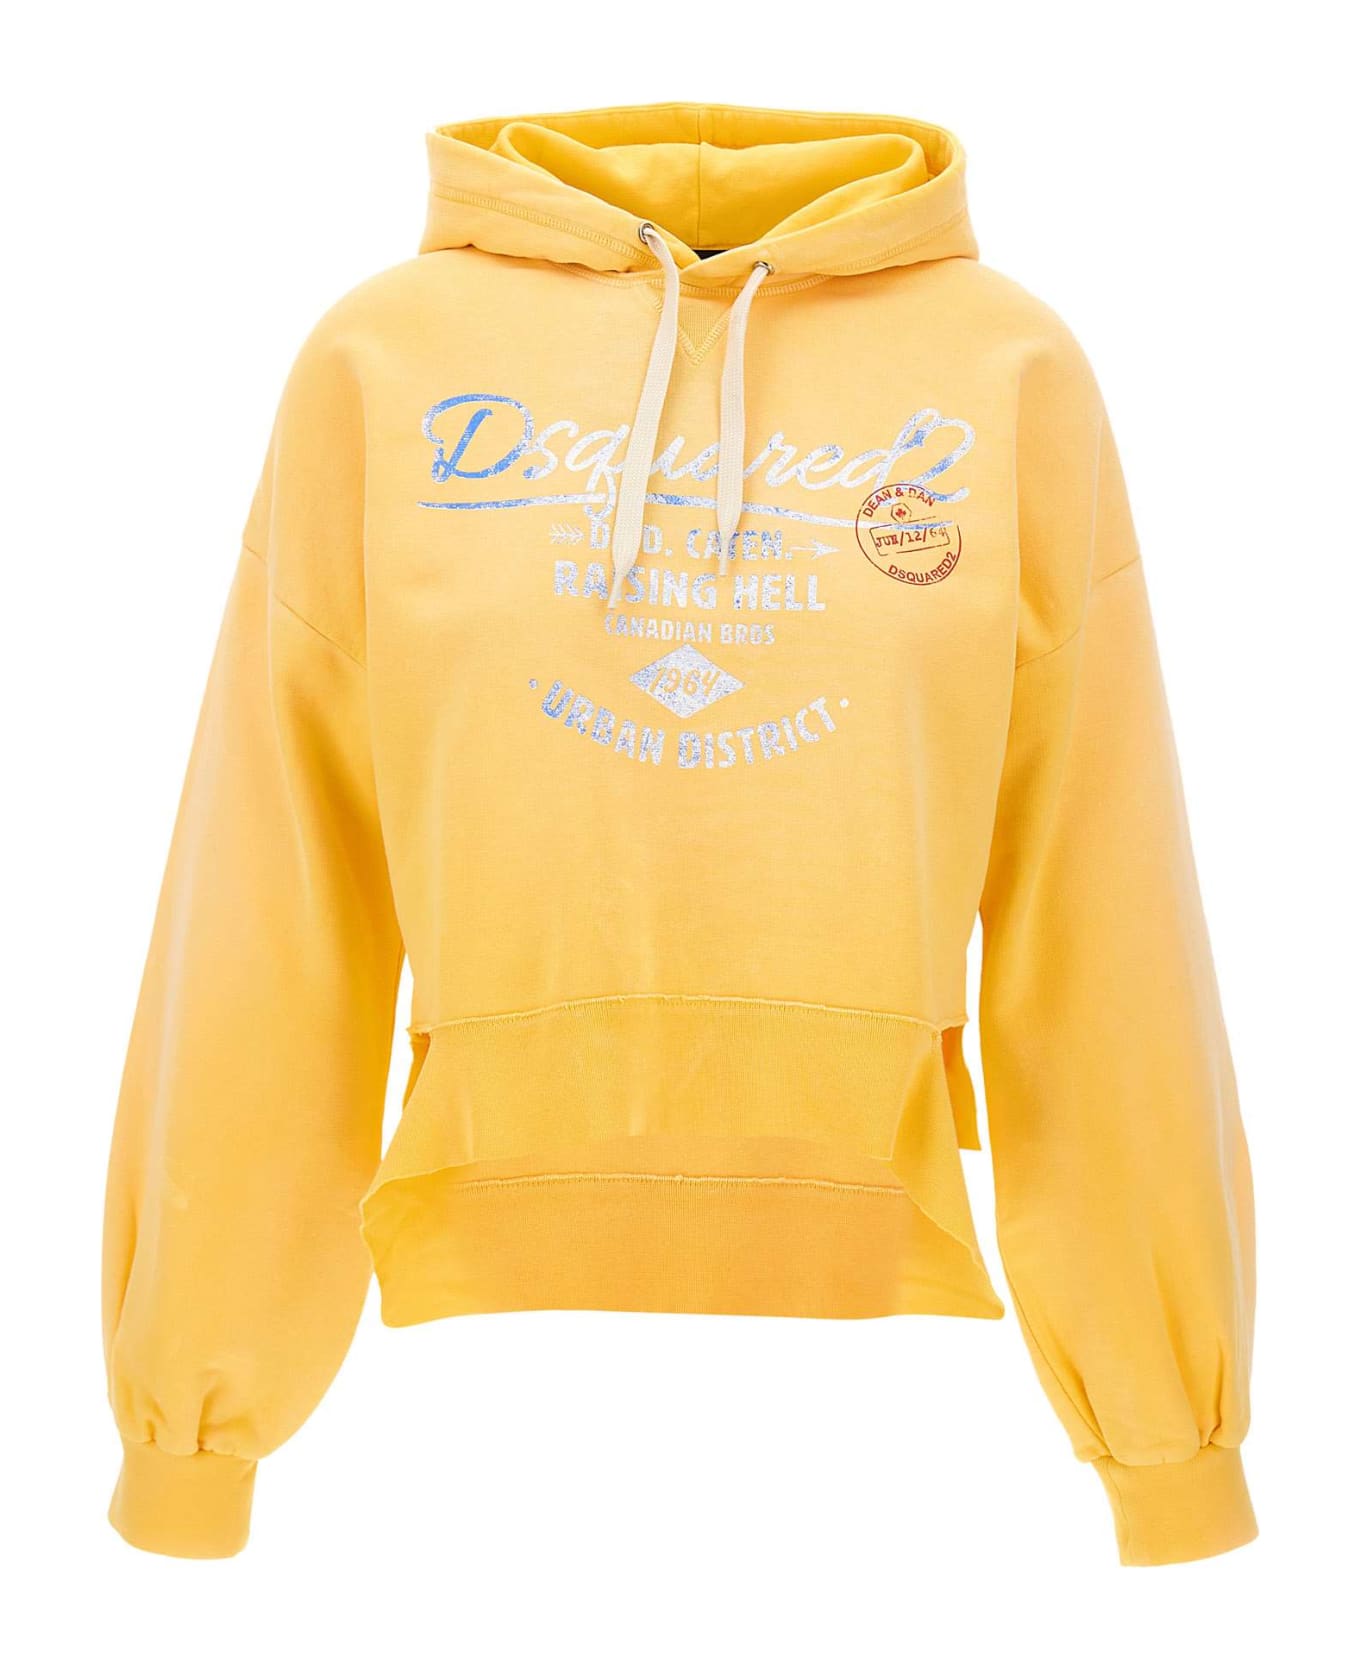 Dsquared2 'relaxed Cropped' Cotton Sweatshirt - YELLOW